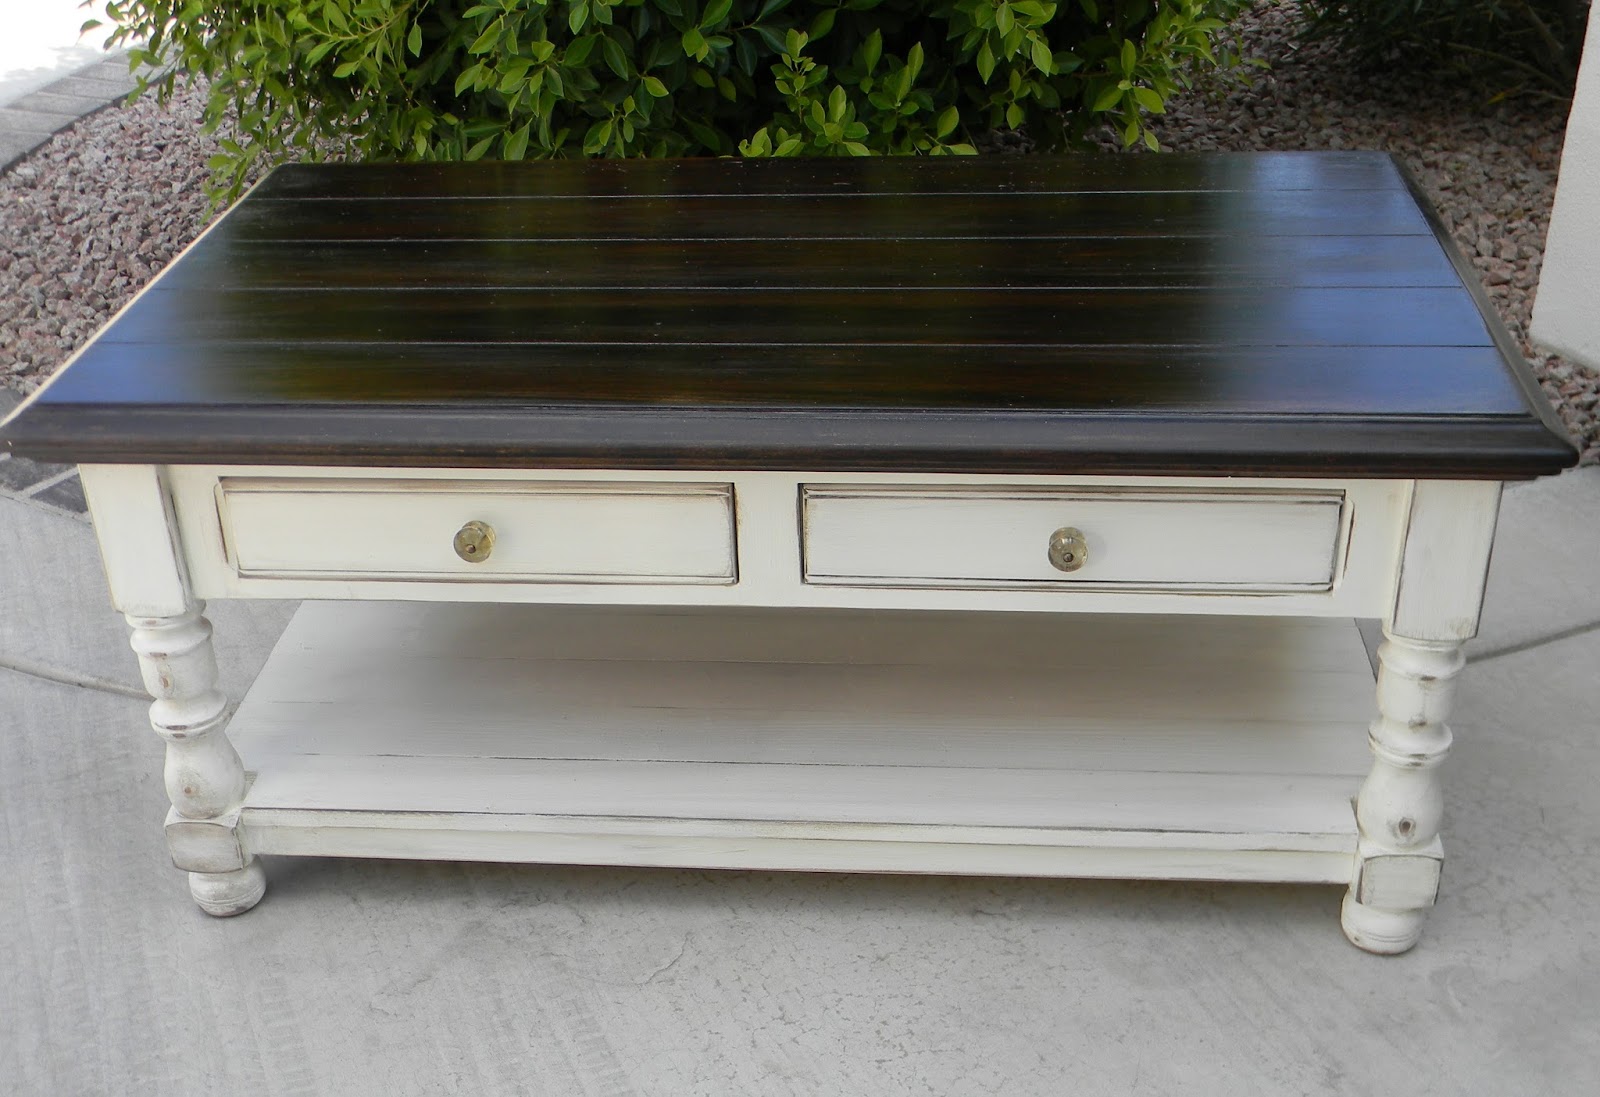 Little Bit of Paint: Refinished Coffee Table